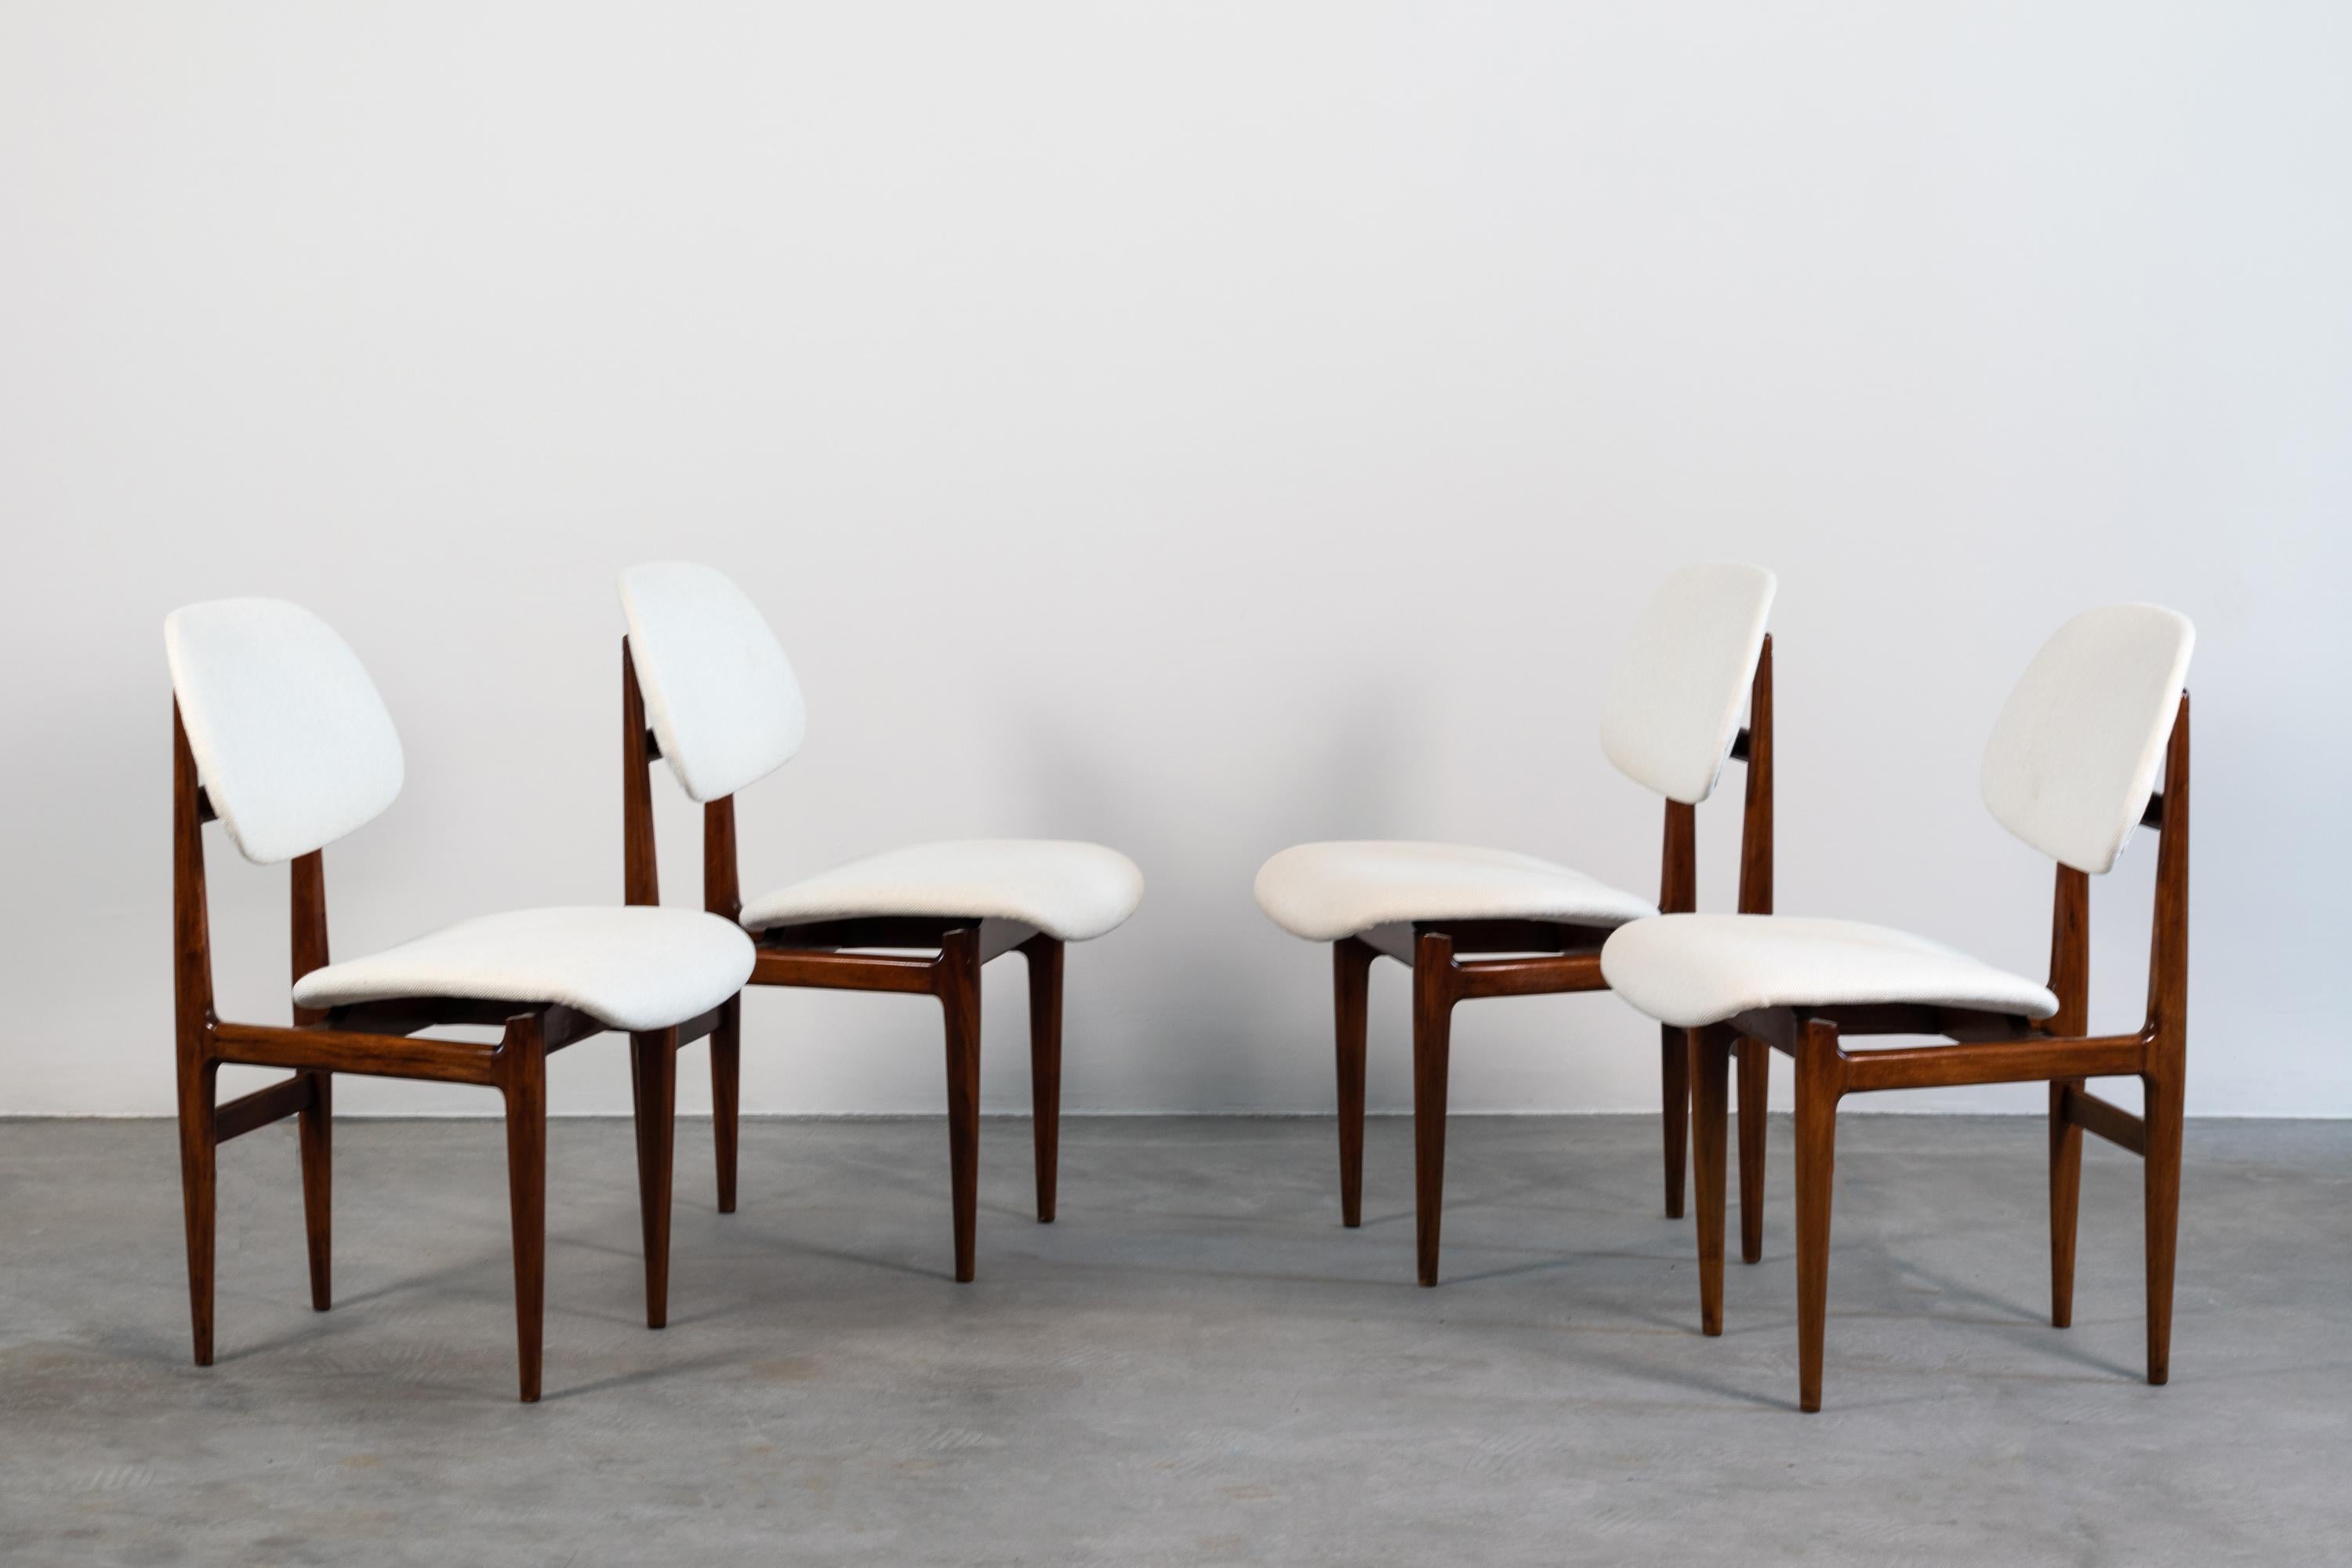 Set of four chairs designed by Carlo Hauner & Martin Eisler for Forma (Mompiano Brescia, 1960).
These chairs present a walnut wood structure upholstered in a beautiful ivory fabric.
   